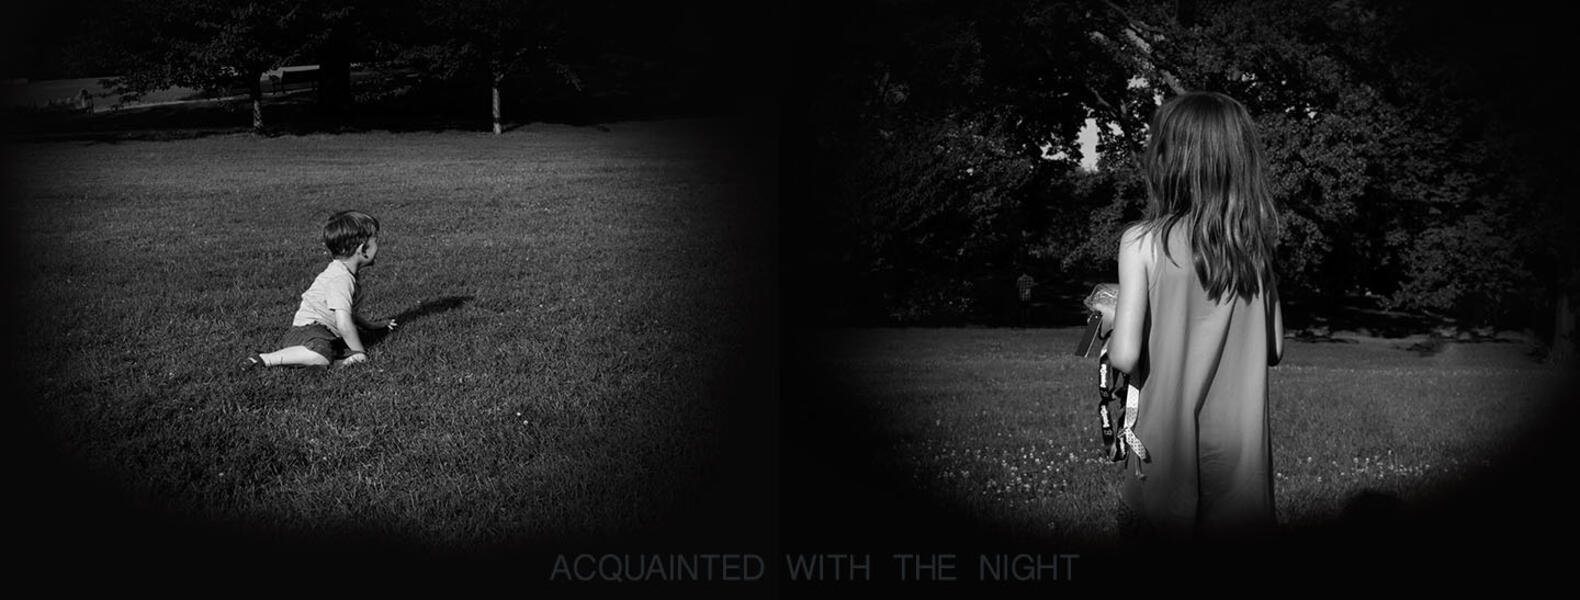  Acquainted With The Night.jpg